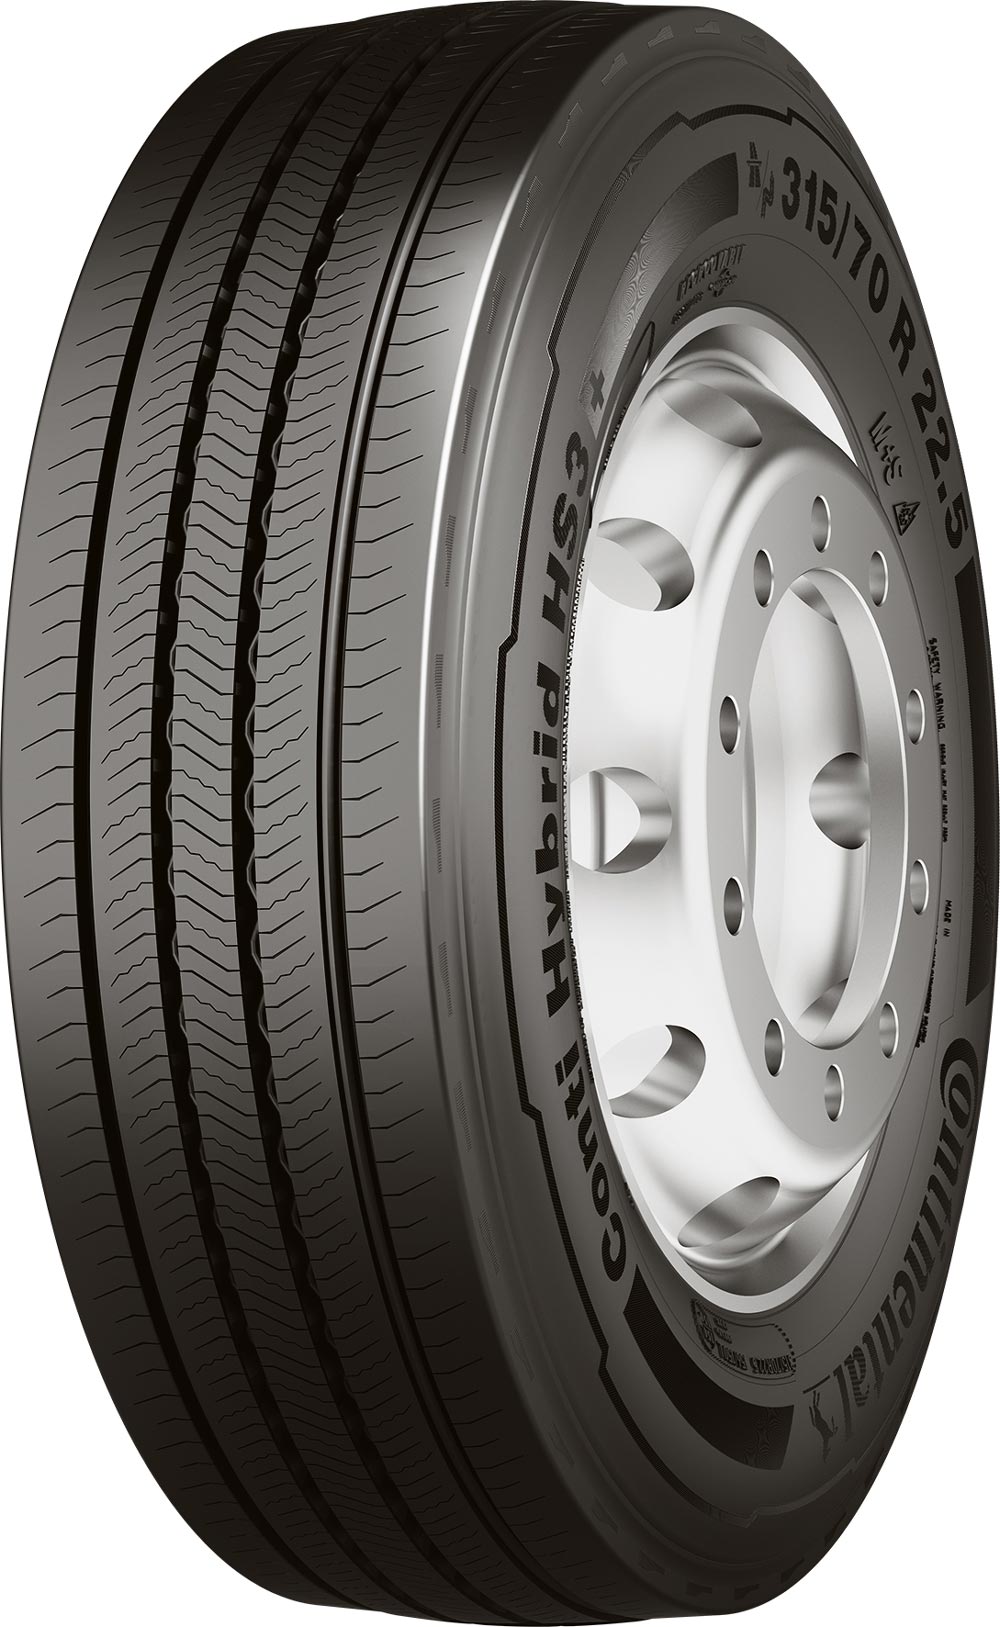 product_type-heavy_tires CONTINENTAL Conti Hybrid HS3+ 16PR 295/80 R22.5 154M